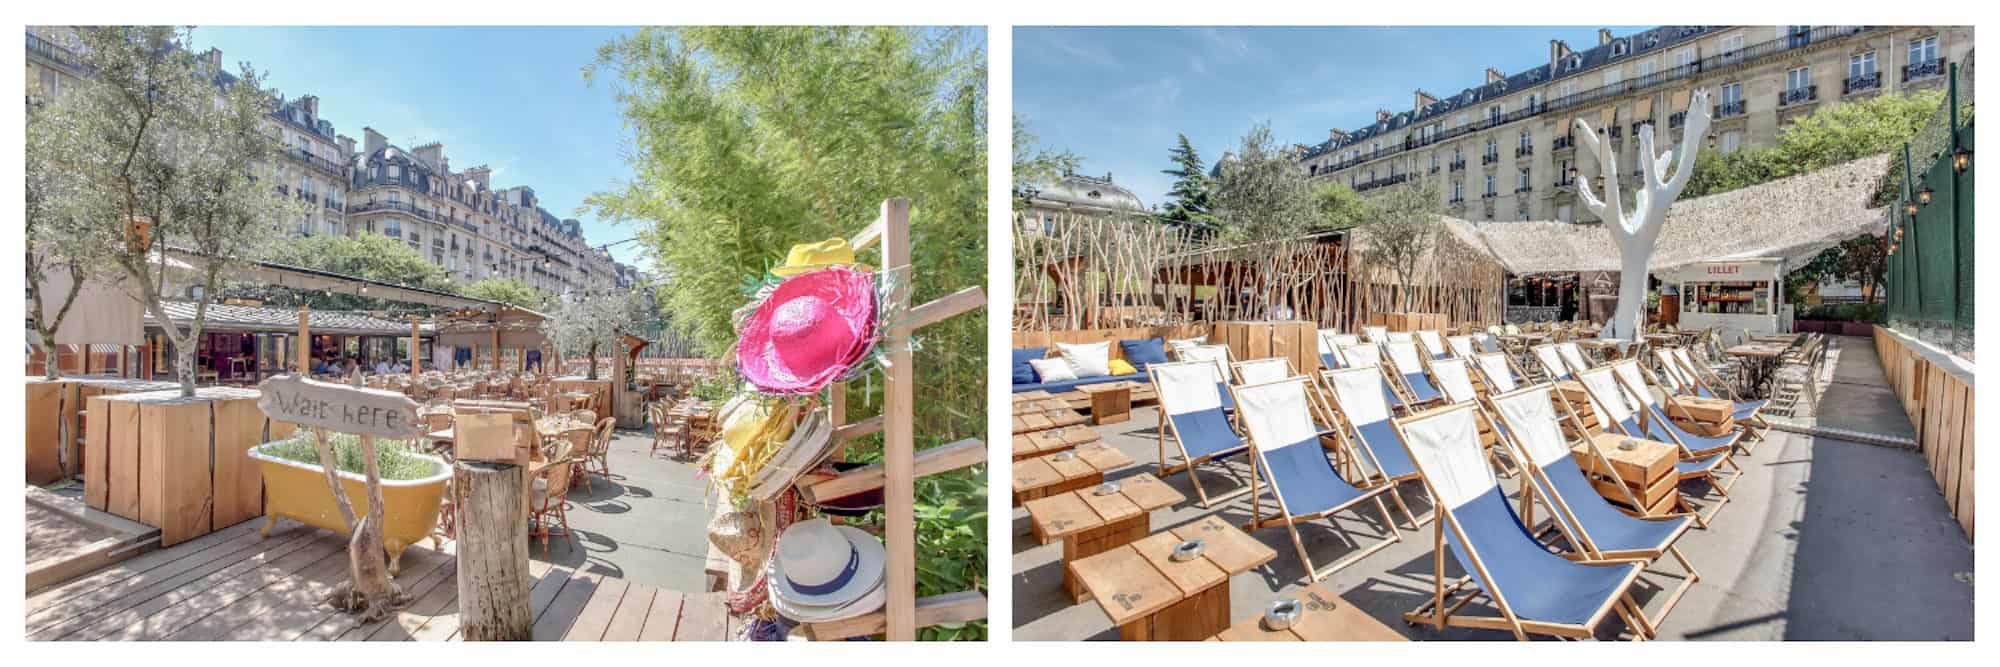 One of the best places to tan in Paris is Il Cottage with its timber tables and rattan chairs in the 16th district (left). Il Cottage also has plenty of deck chairs for topping up your tan in Paris this summer.